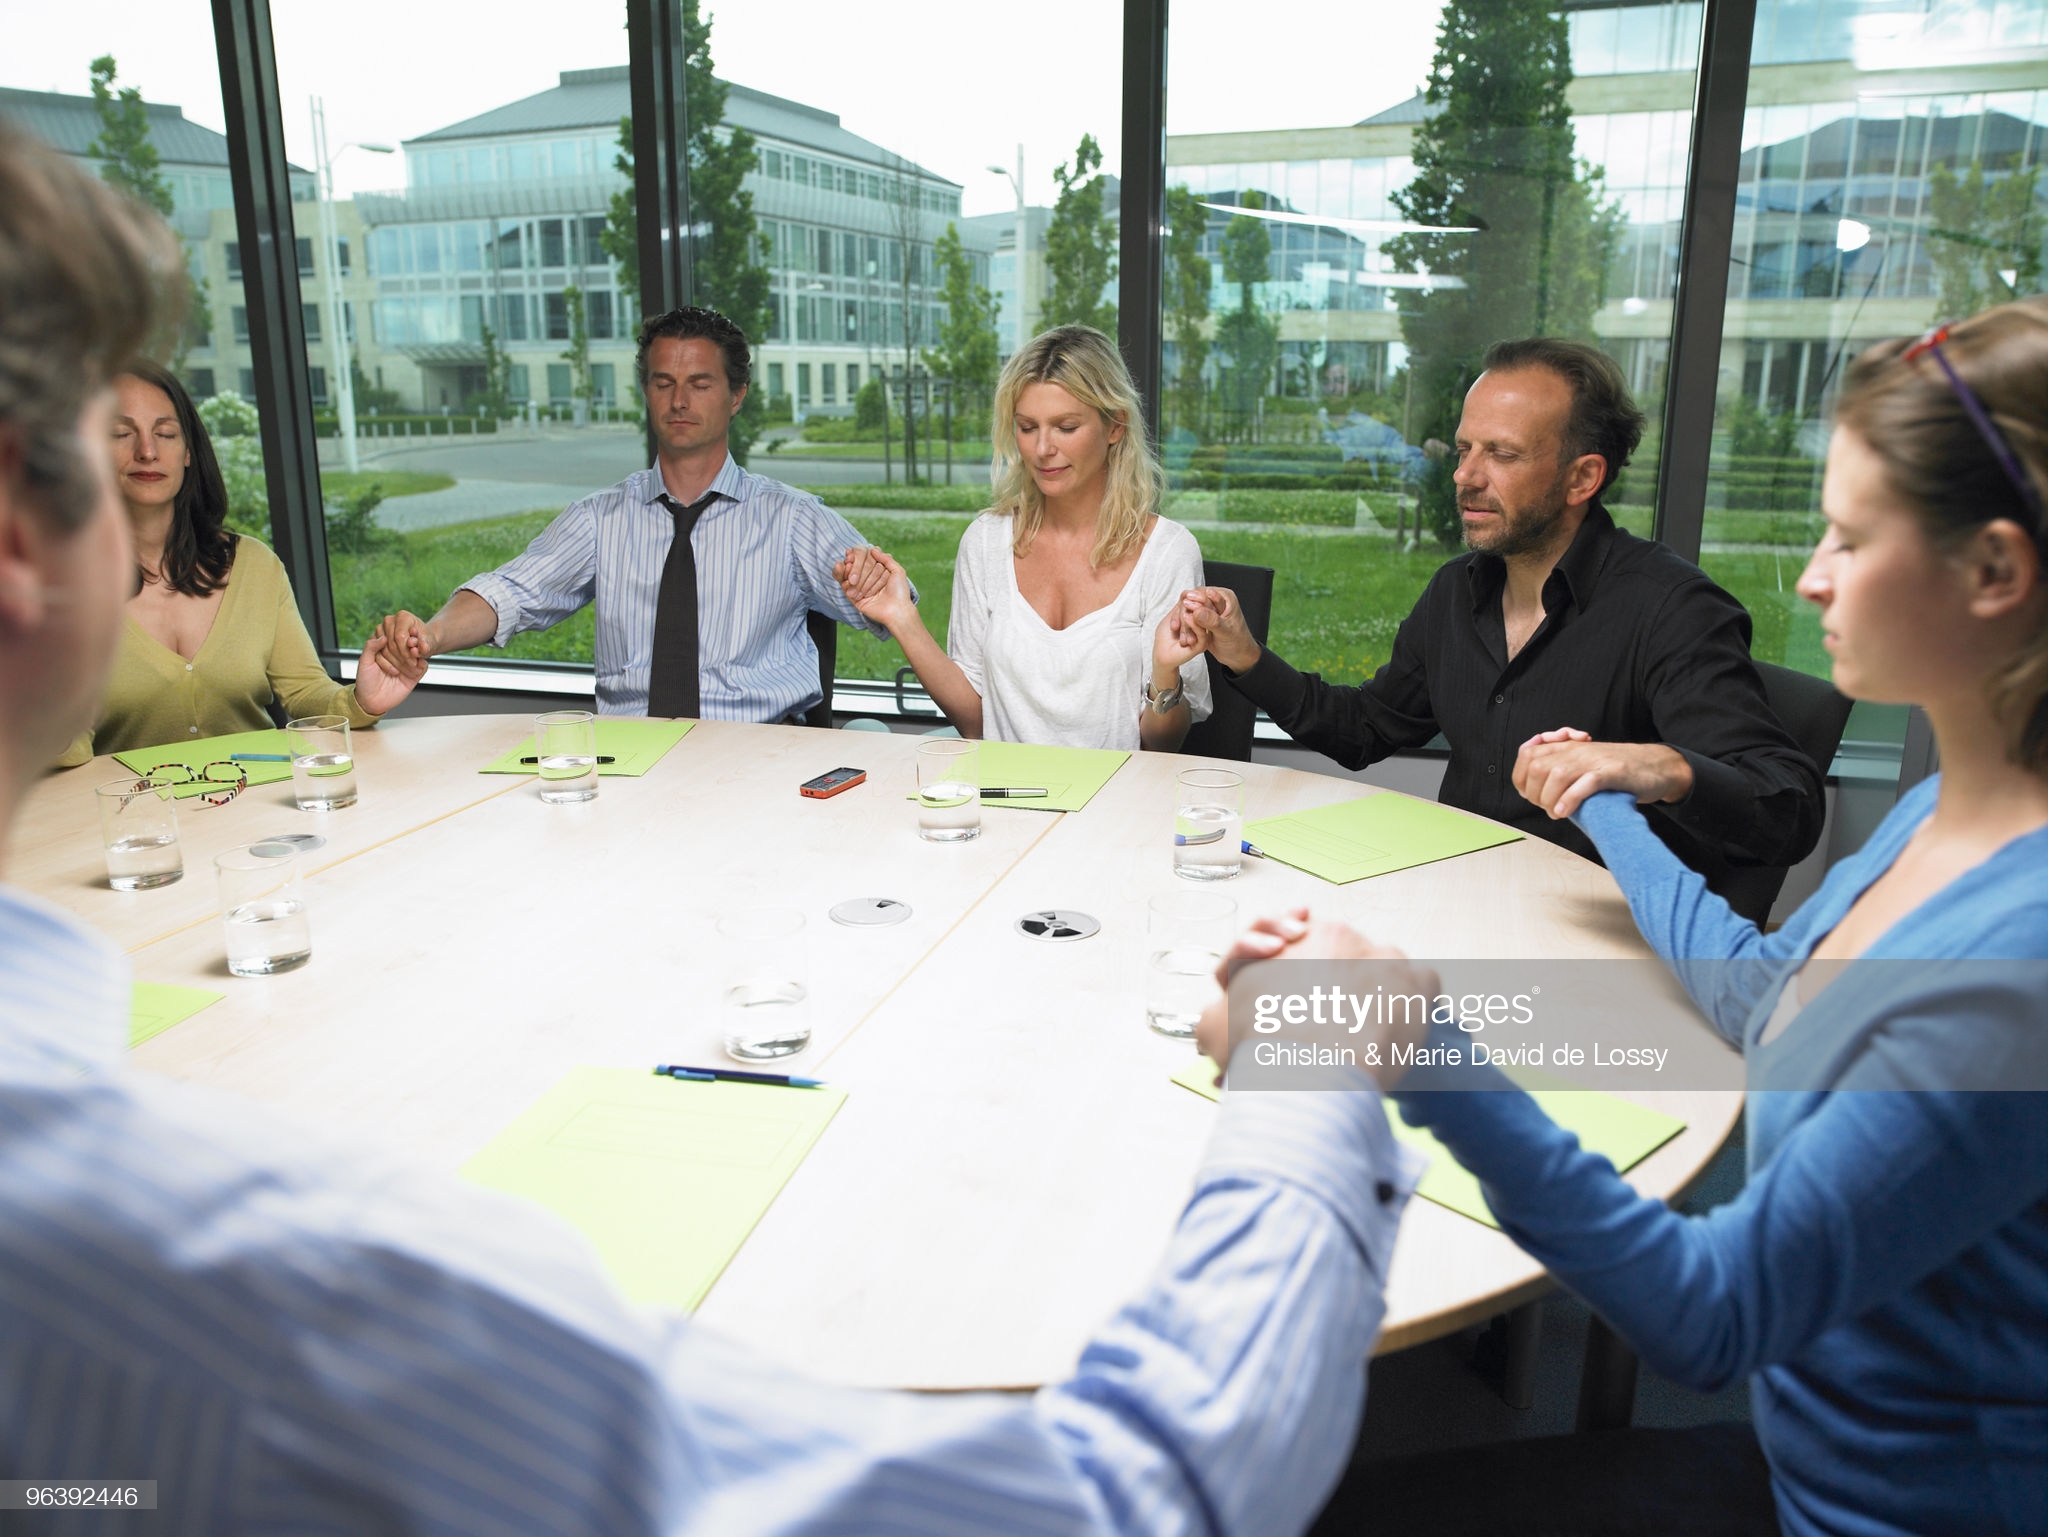 Coworkers holding hands - stock photo. Getty Images, Ghislain & Marie David de Lossy.